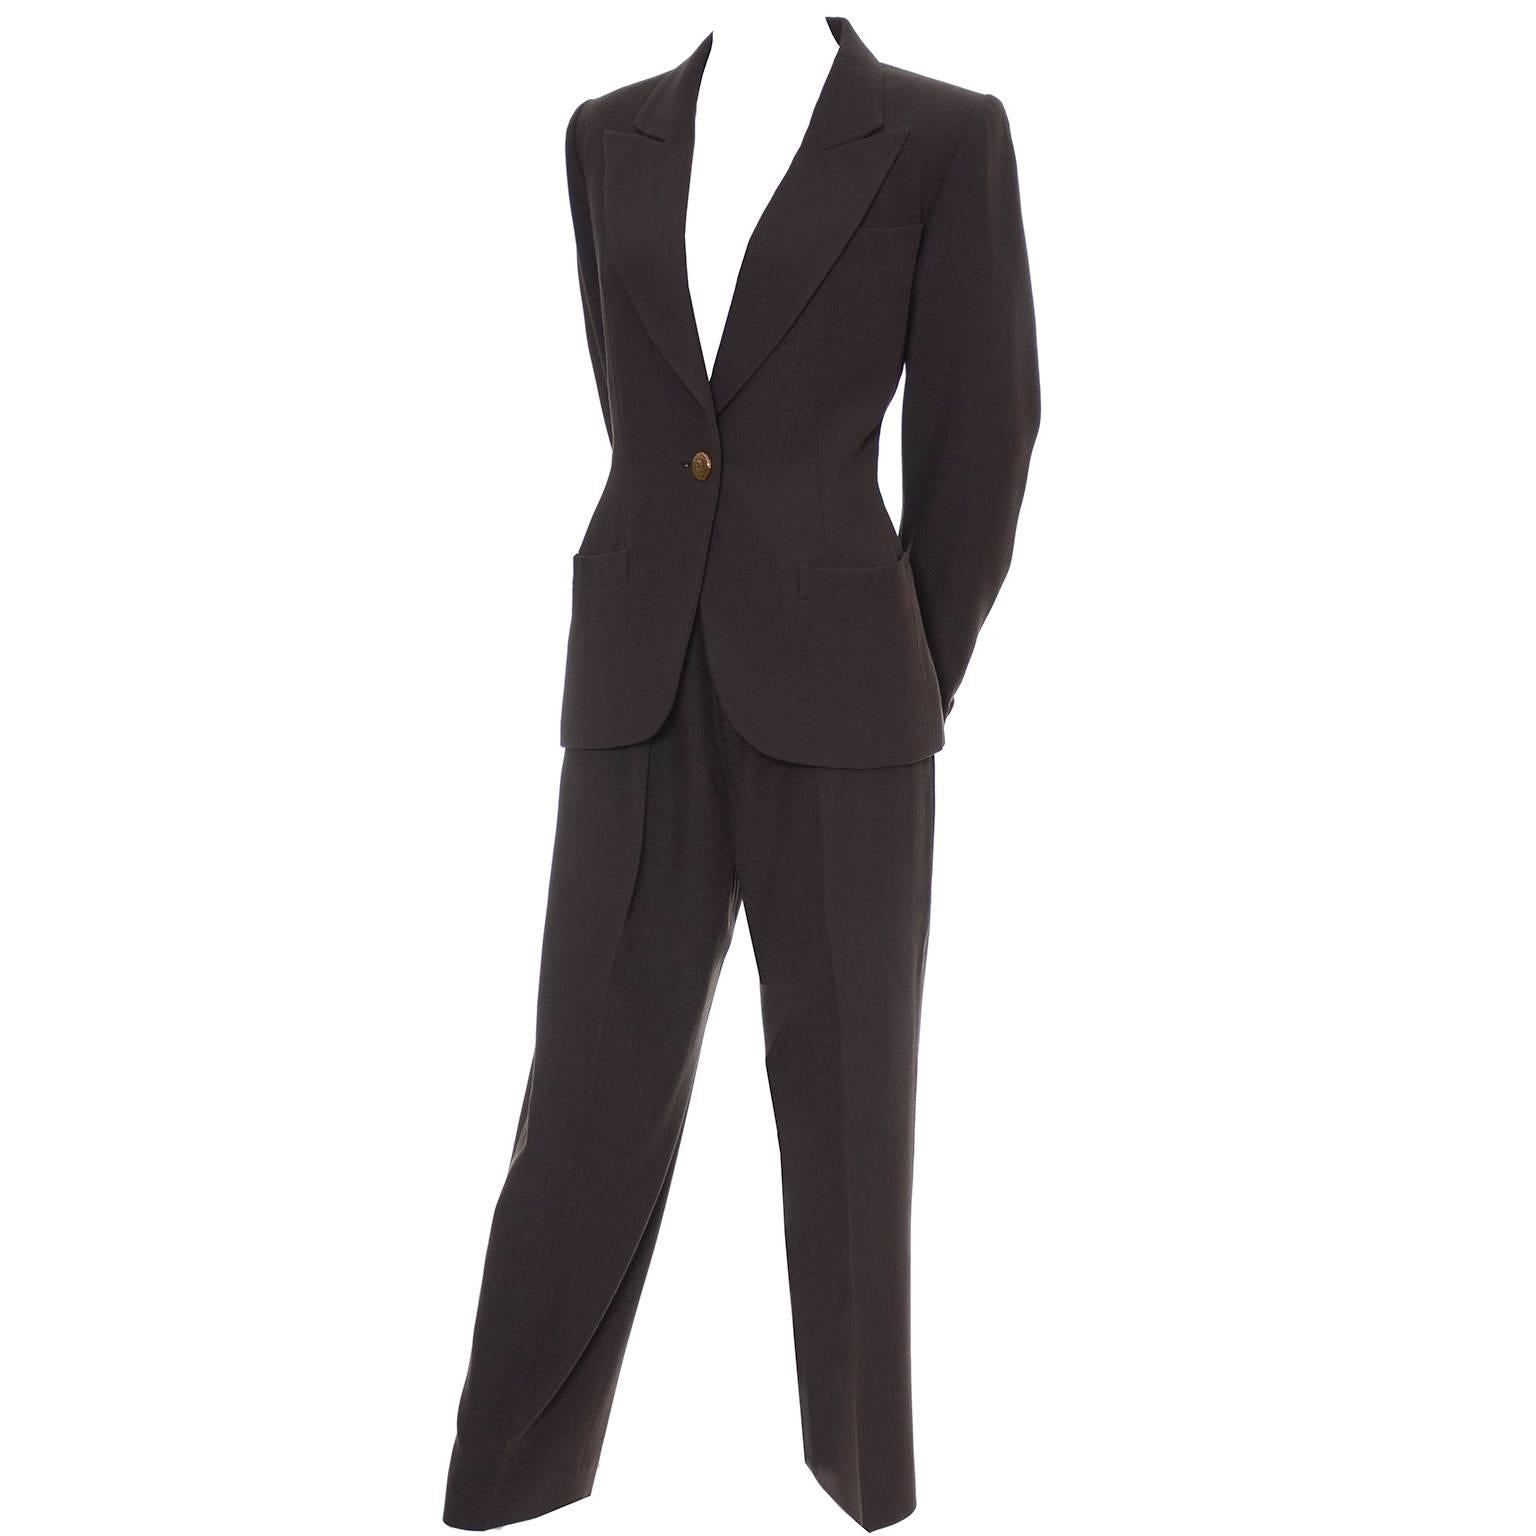 YSL Vintage Finely Ribbed Wool Pantsuit French Size 40 US 8 Yves Saint Laurent